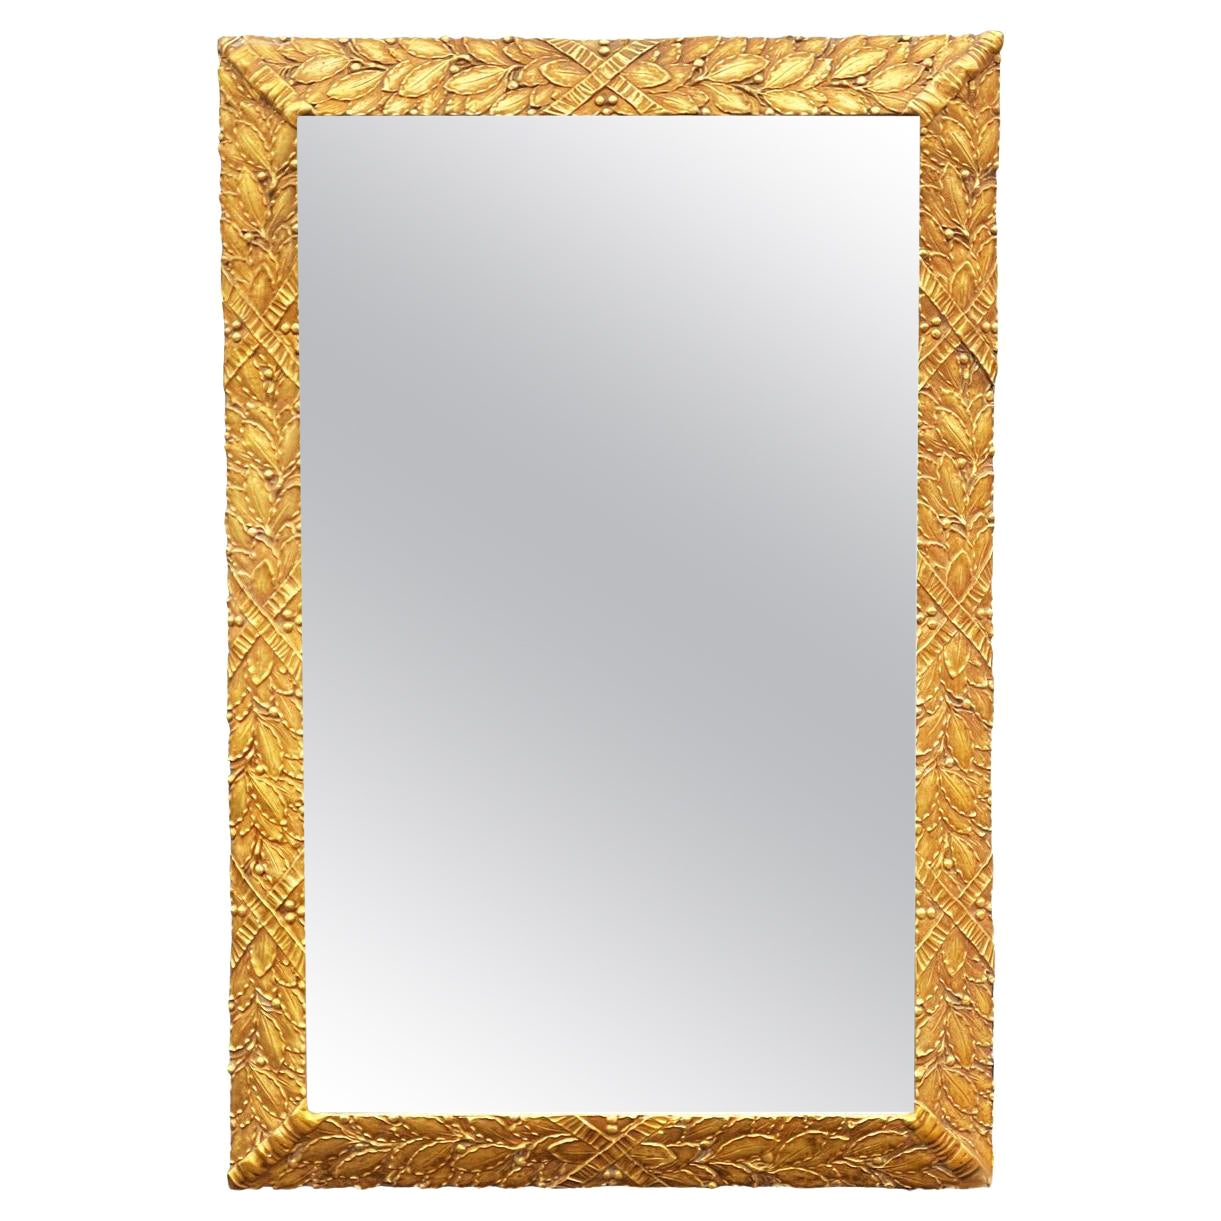 Hollywood Regency Large Italian Rectangular Mirror in Gold Gilded Carved Wood